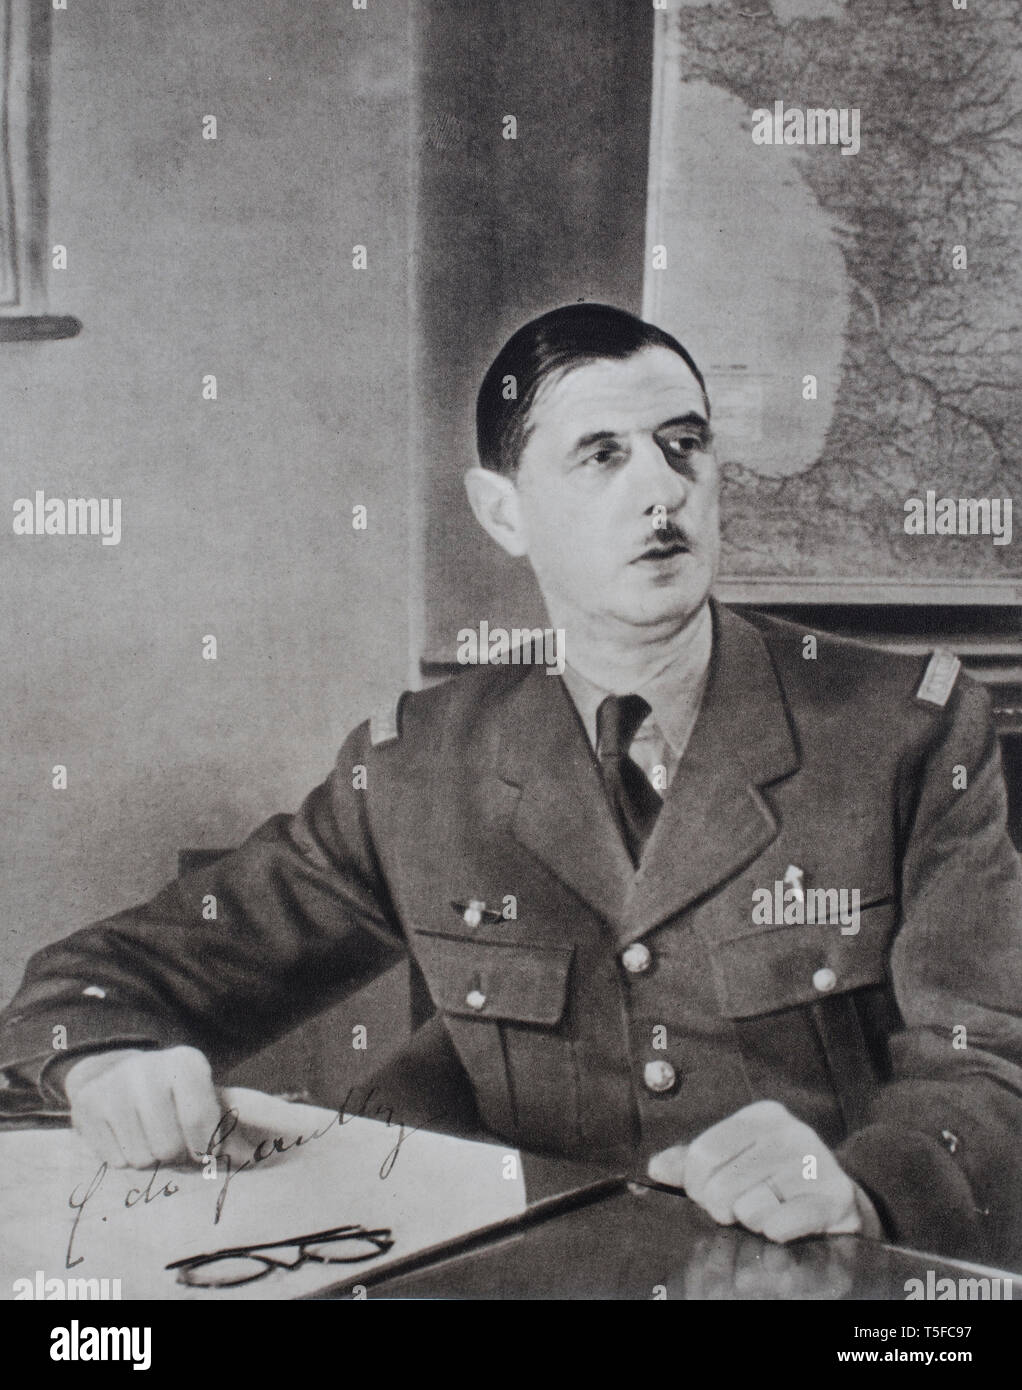 Portrait of Charles de Gaulle (1890 – 1970) a French army officer and statesman who led the French Resistance against Nazi Germany in World War II and Stock Photo